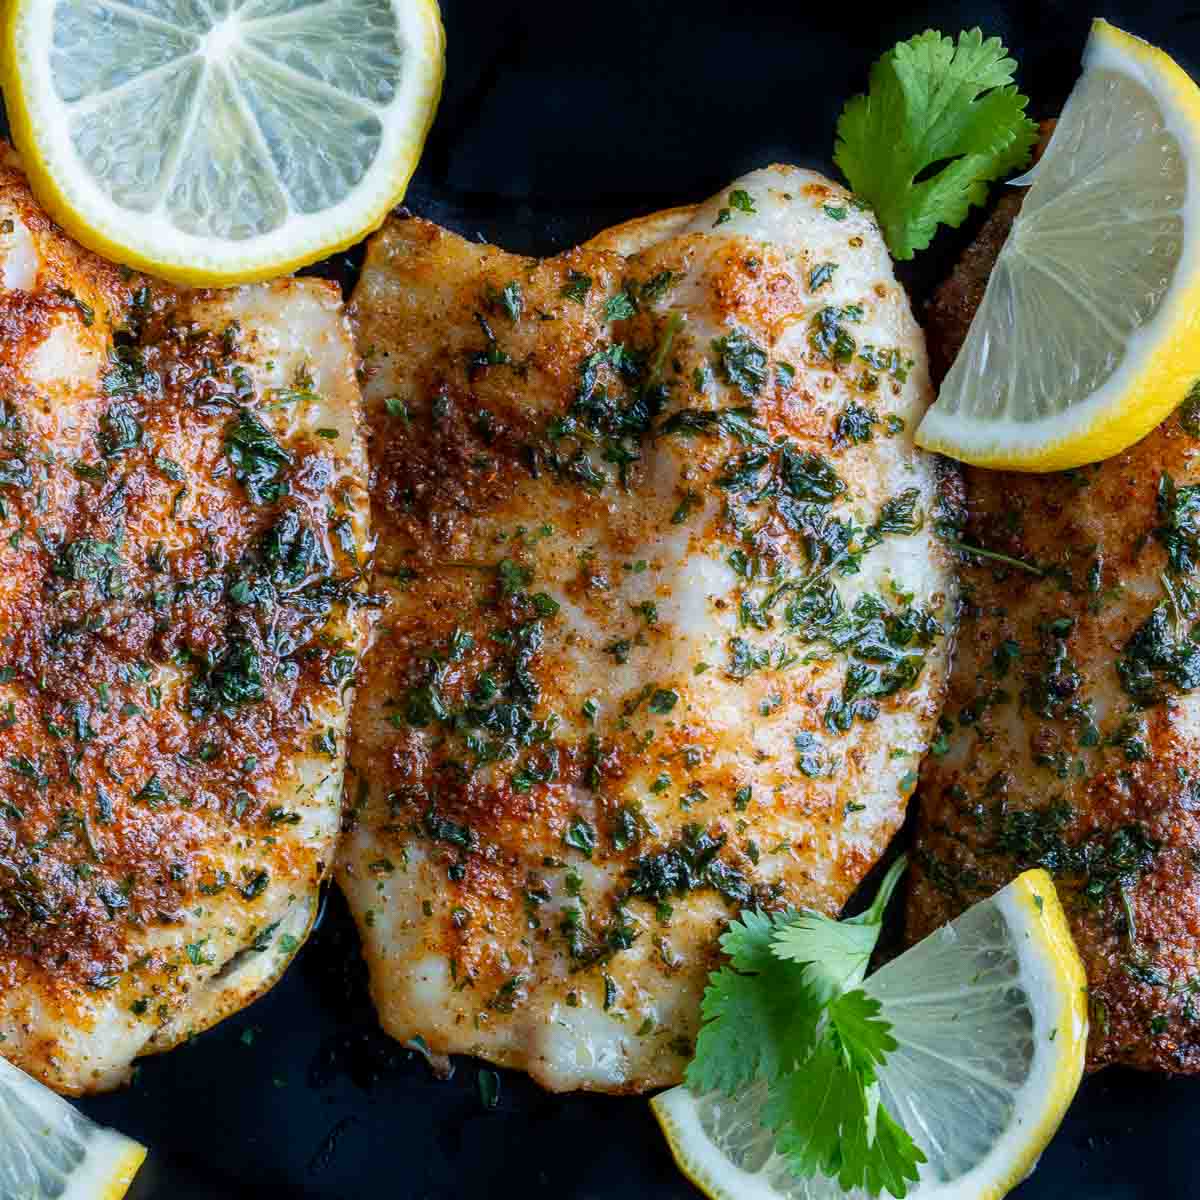 Lemon garlic butter sauce just poured over the fish. 